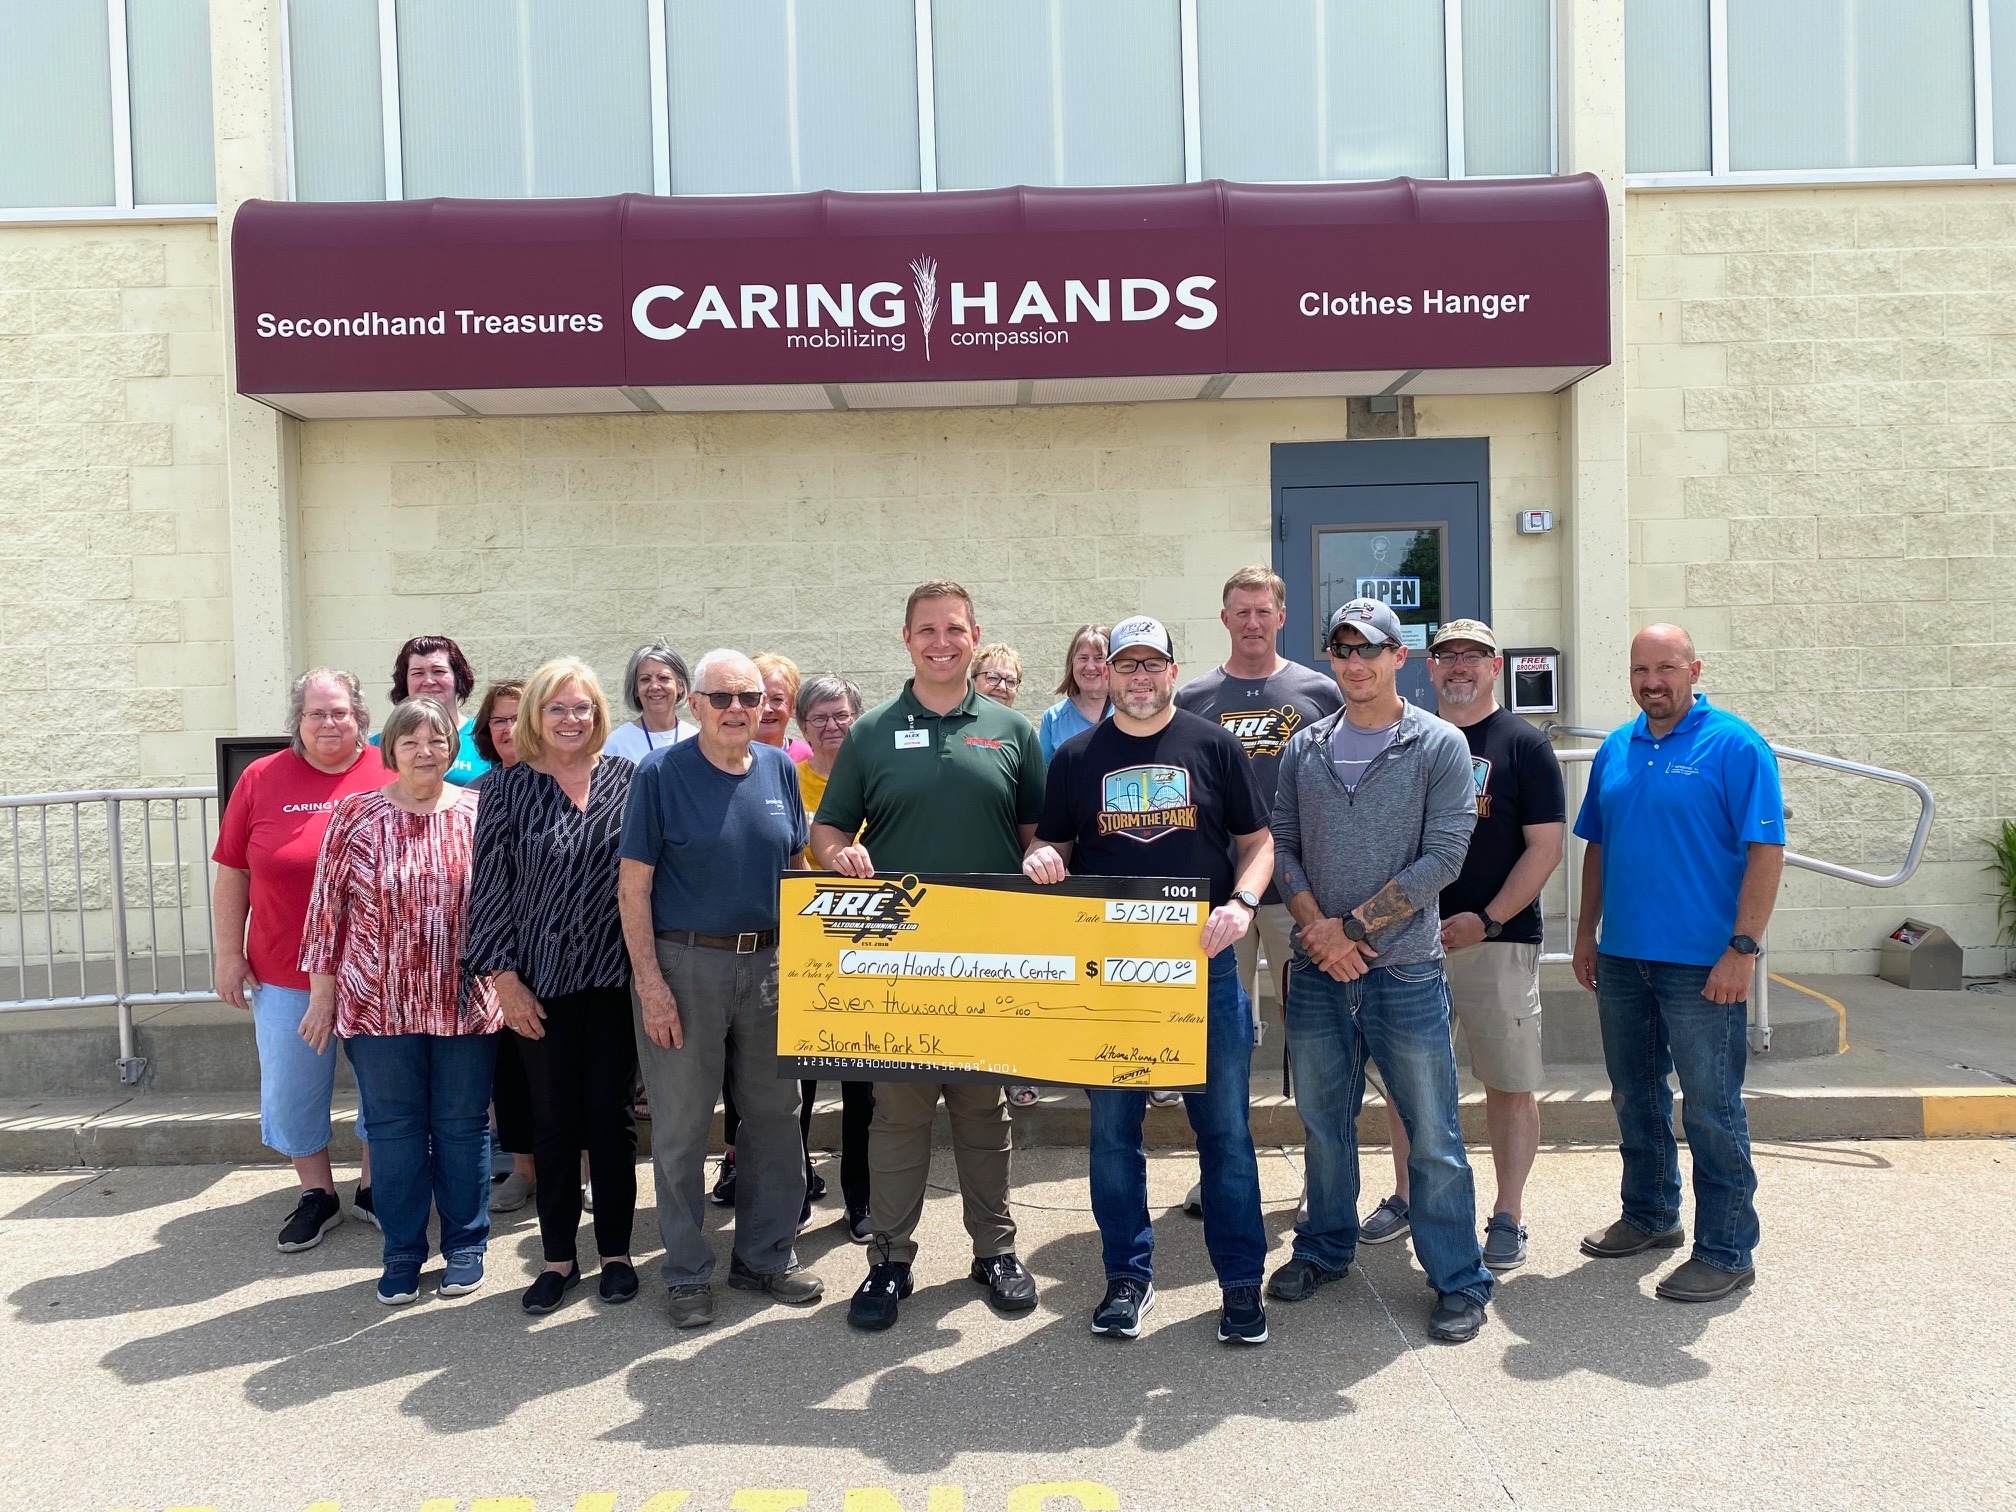 Adventureland makes Donation to Caring Hands